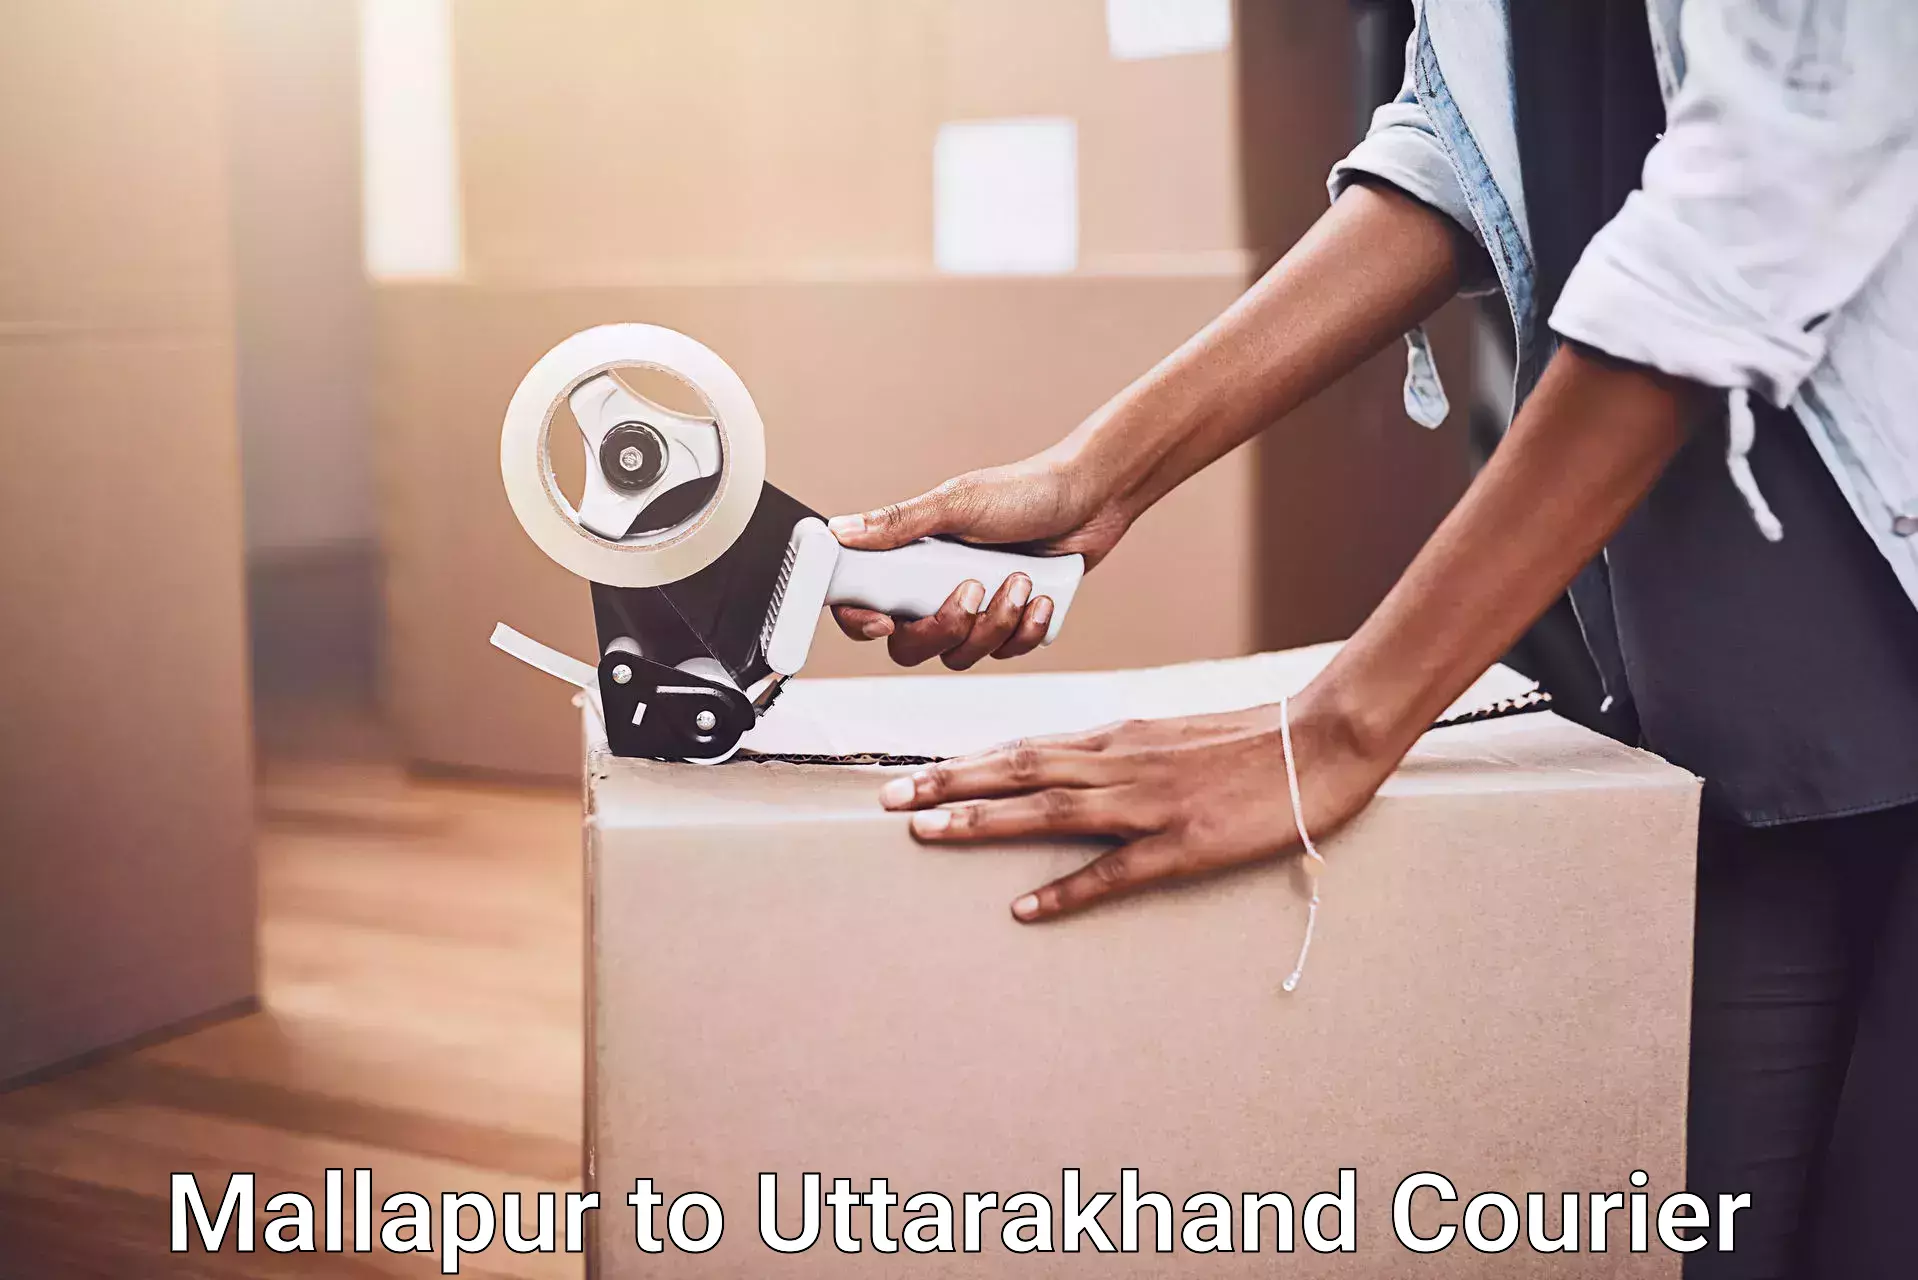 Home relocation experts Mallapur to Bhagwanpur